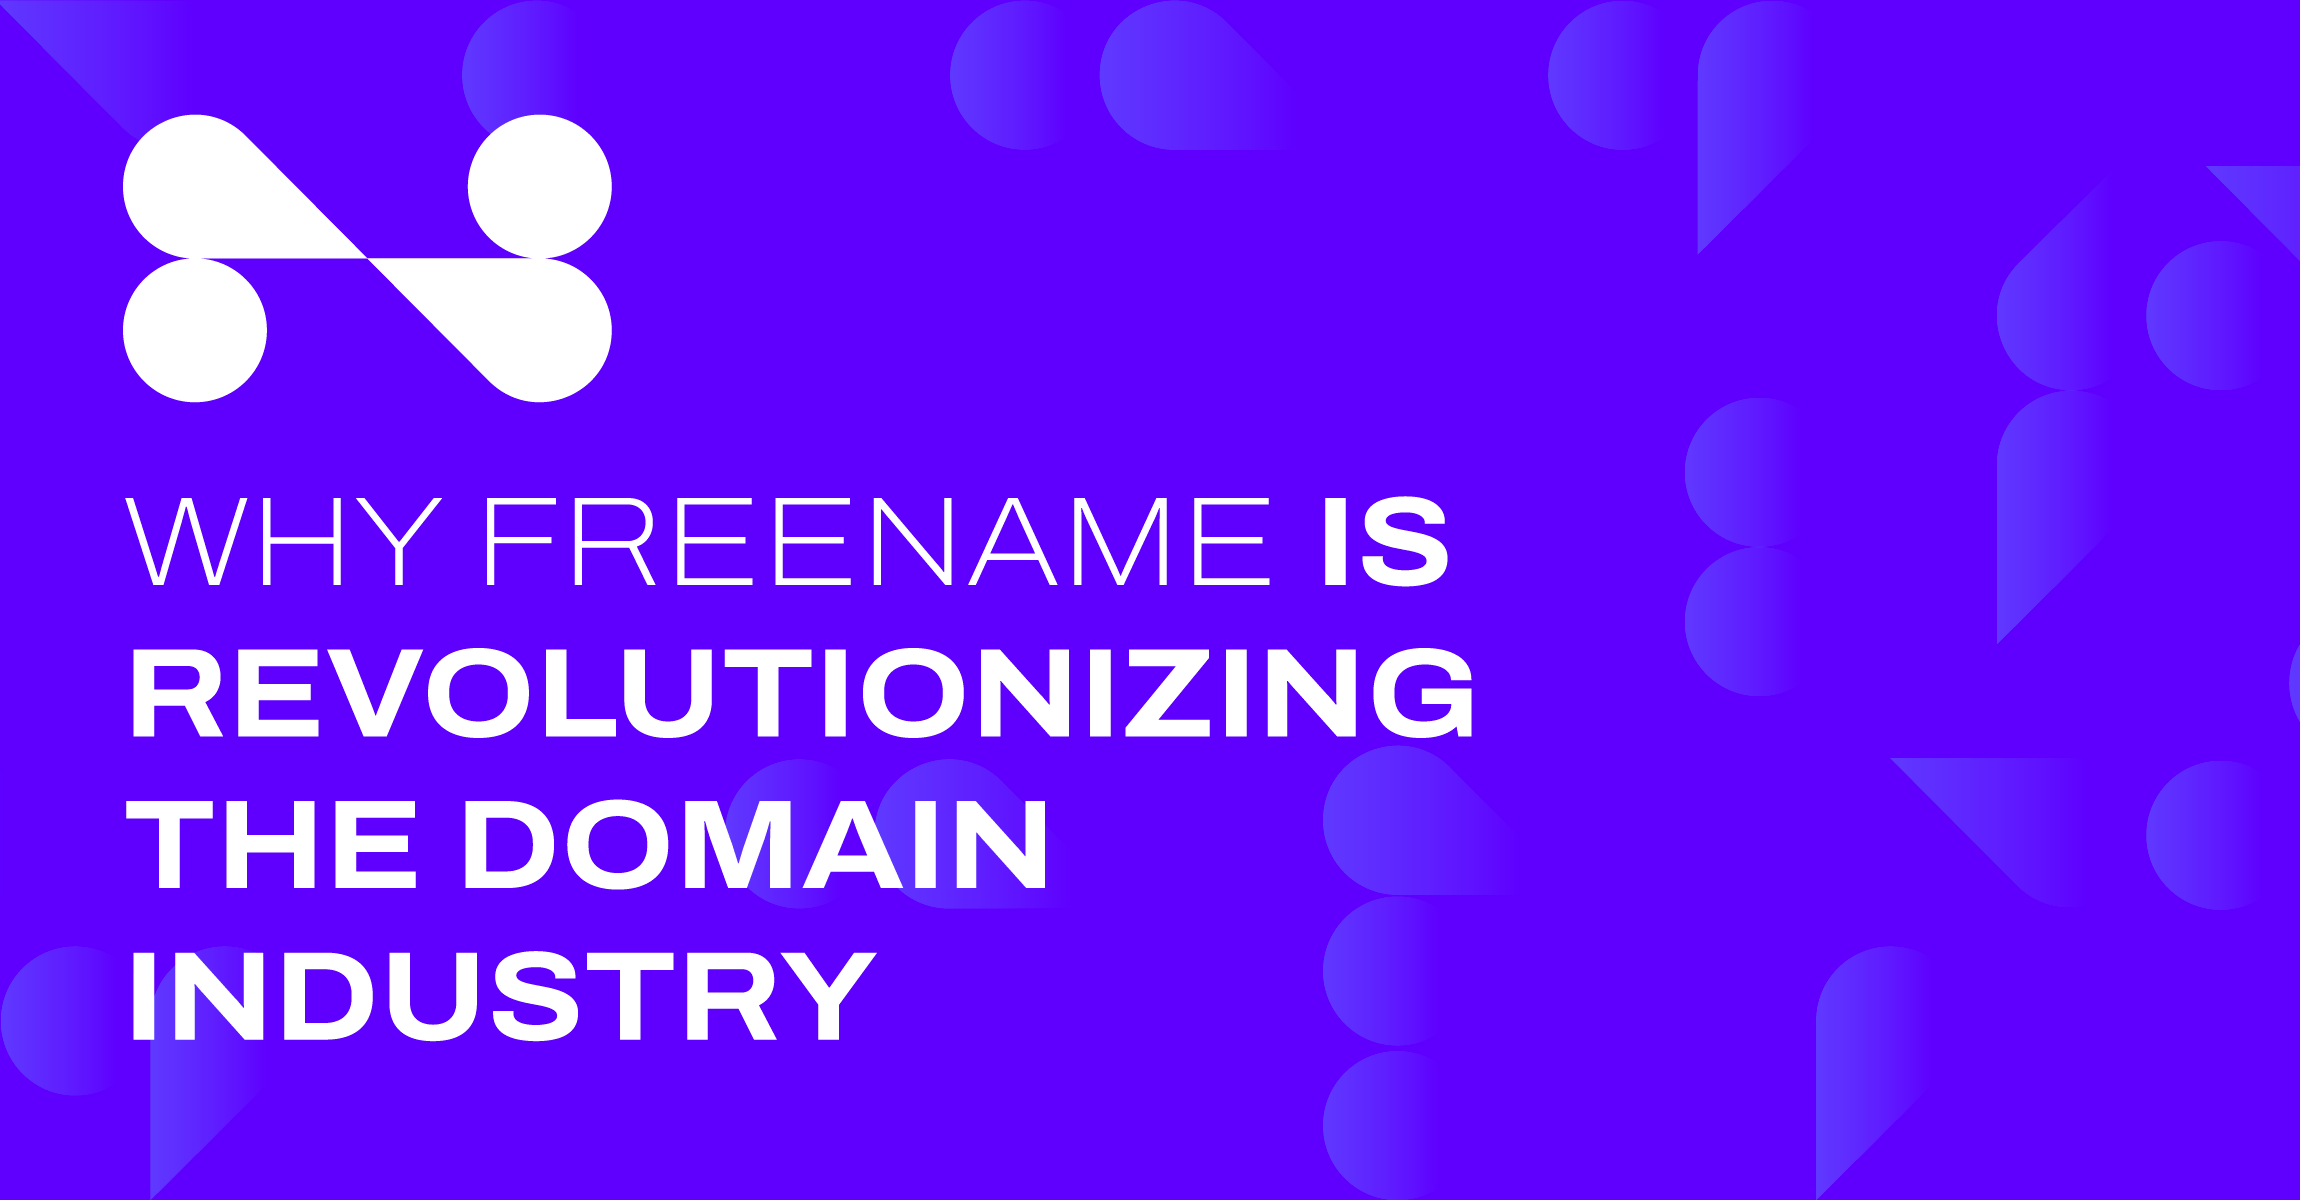 Why Freename is Revolutionizing the Domain Industry